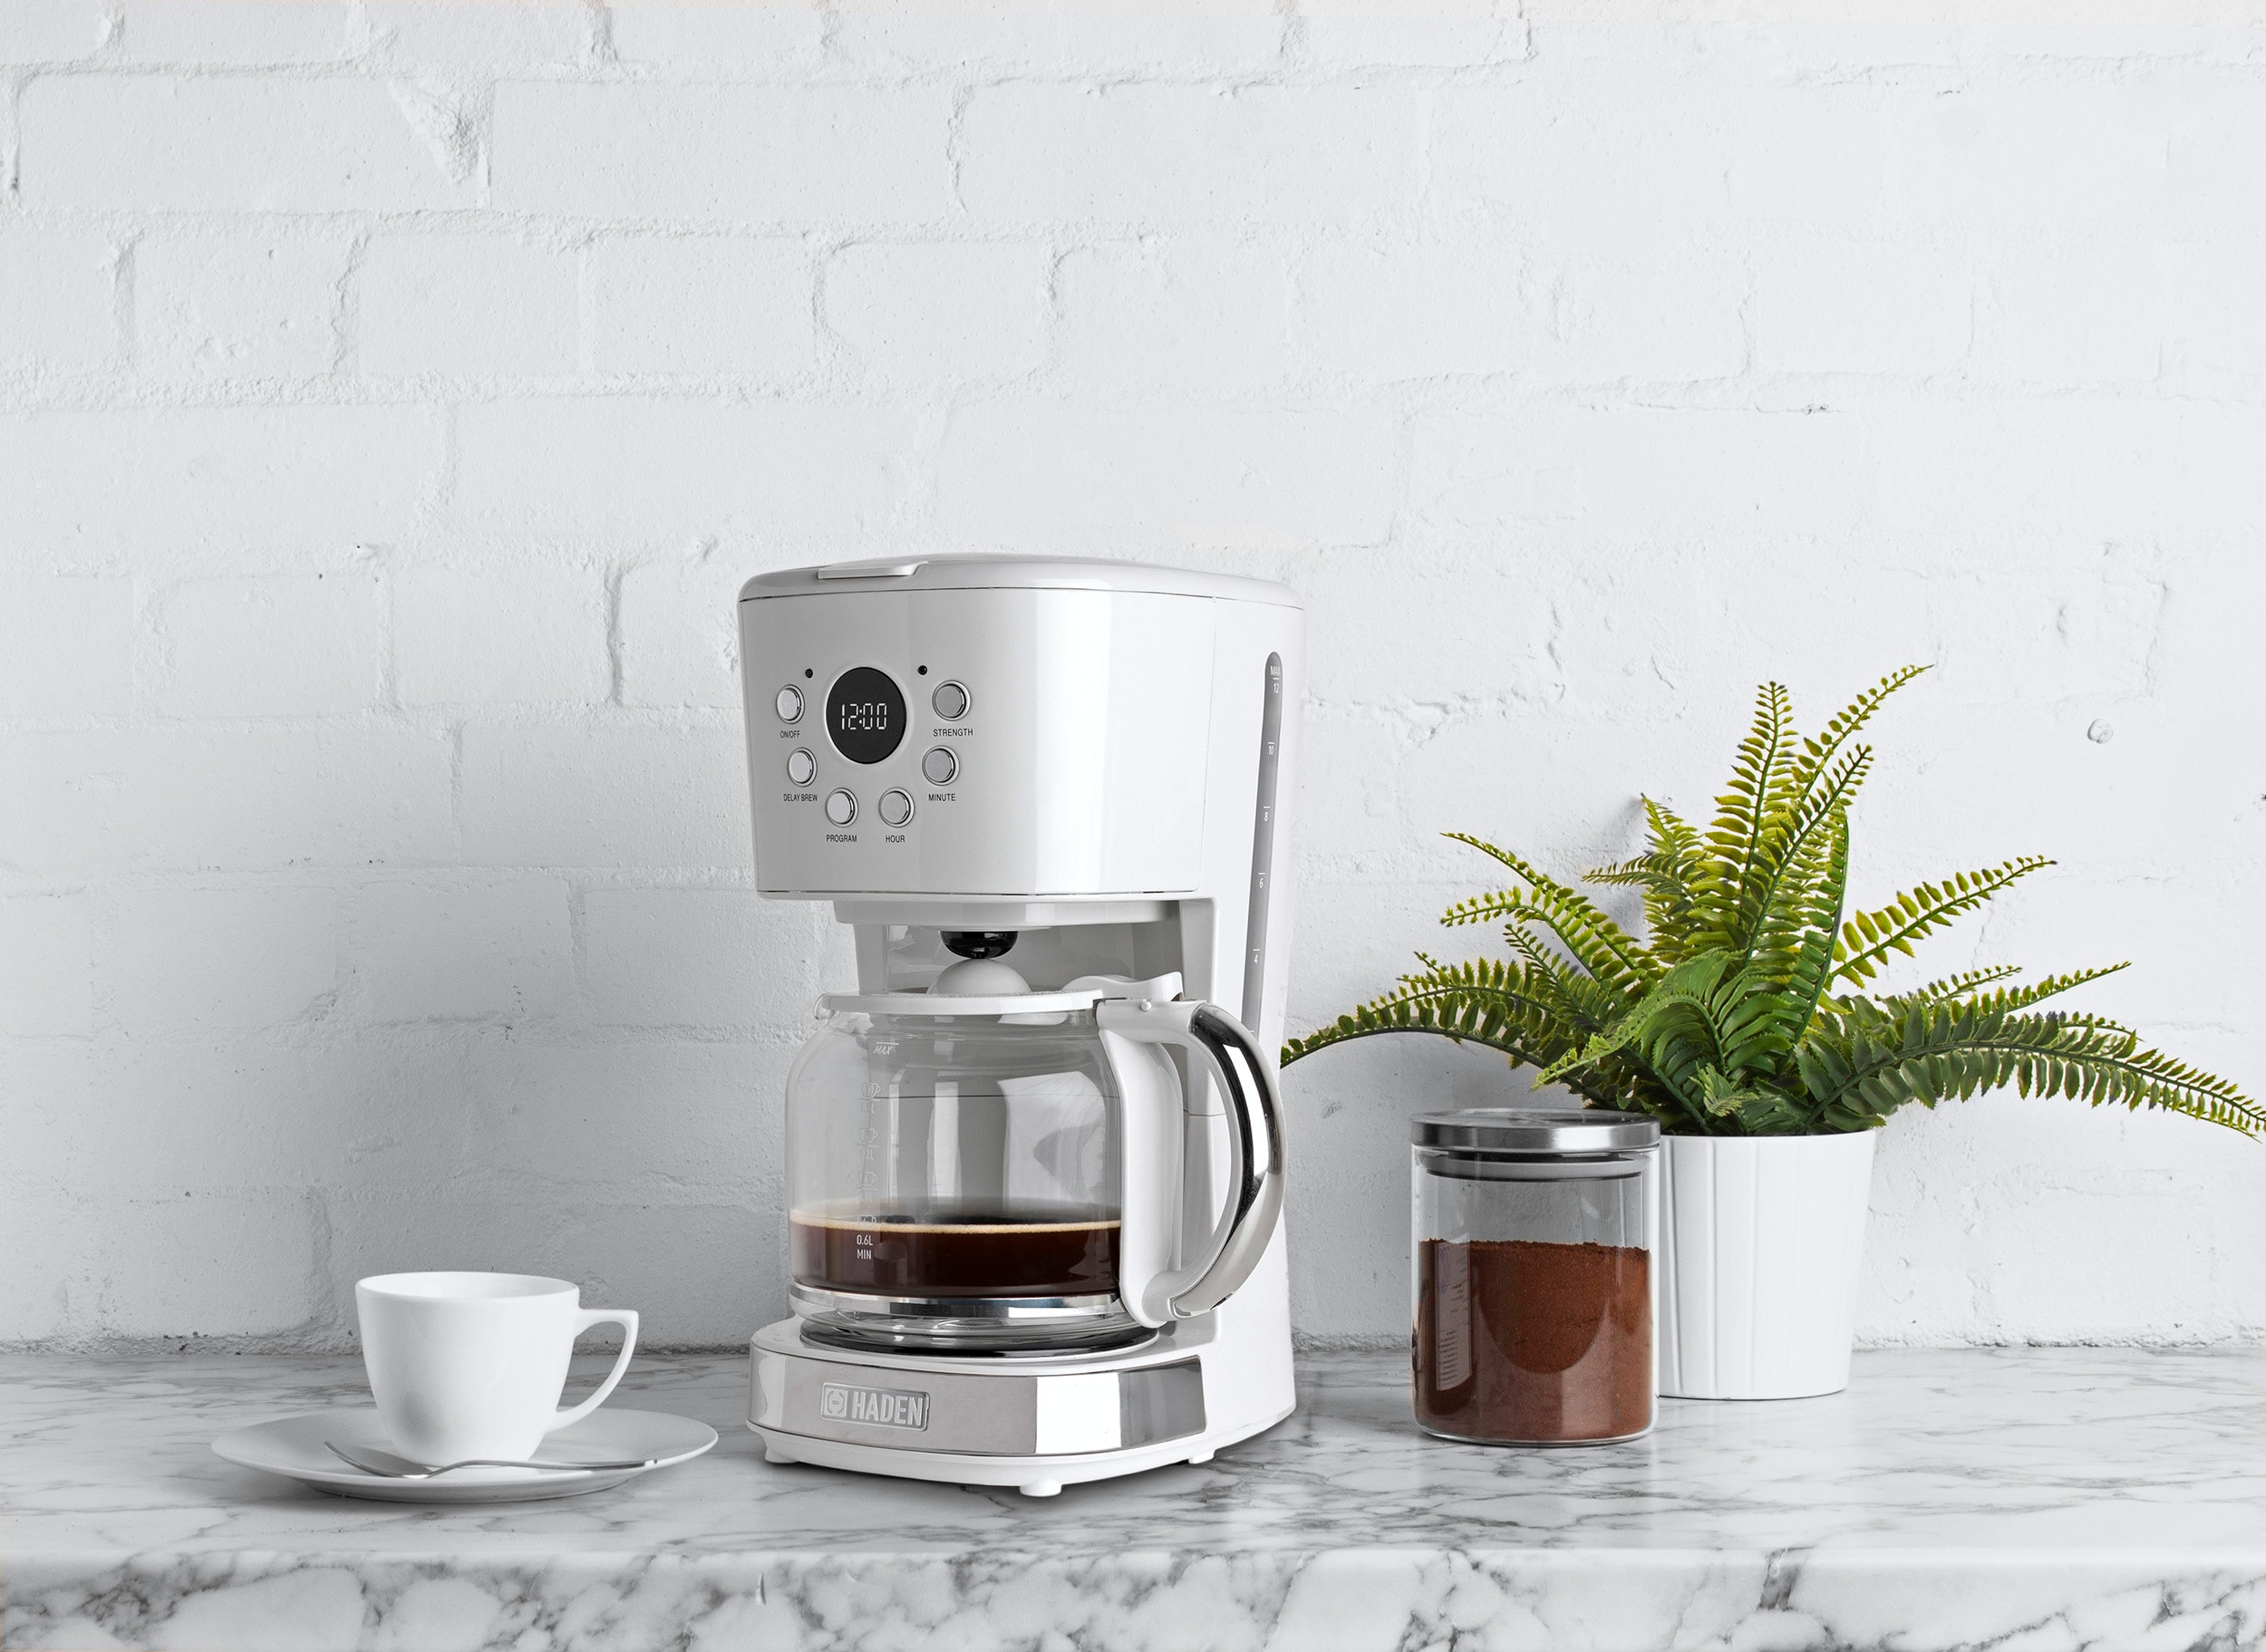 Café Specialty Drip Coffee Maker review: an elegant workhorse